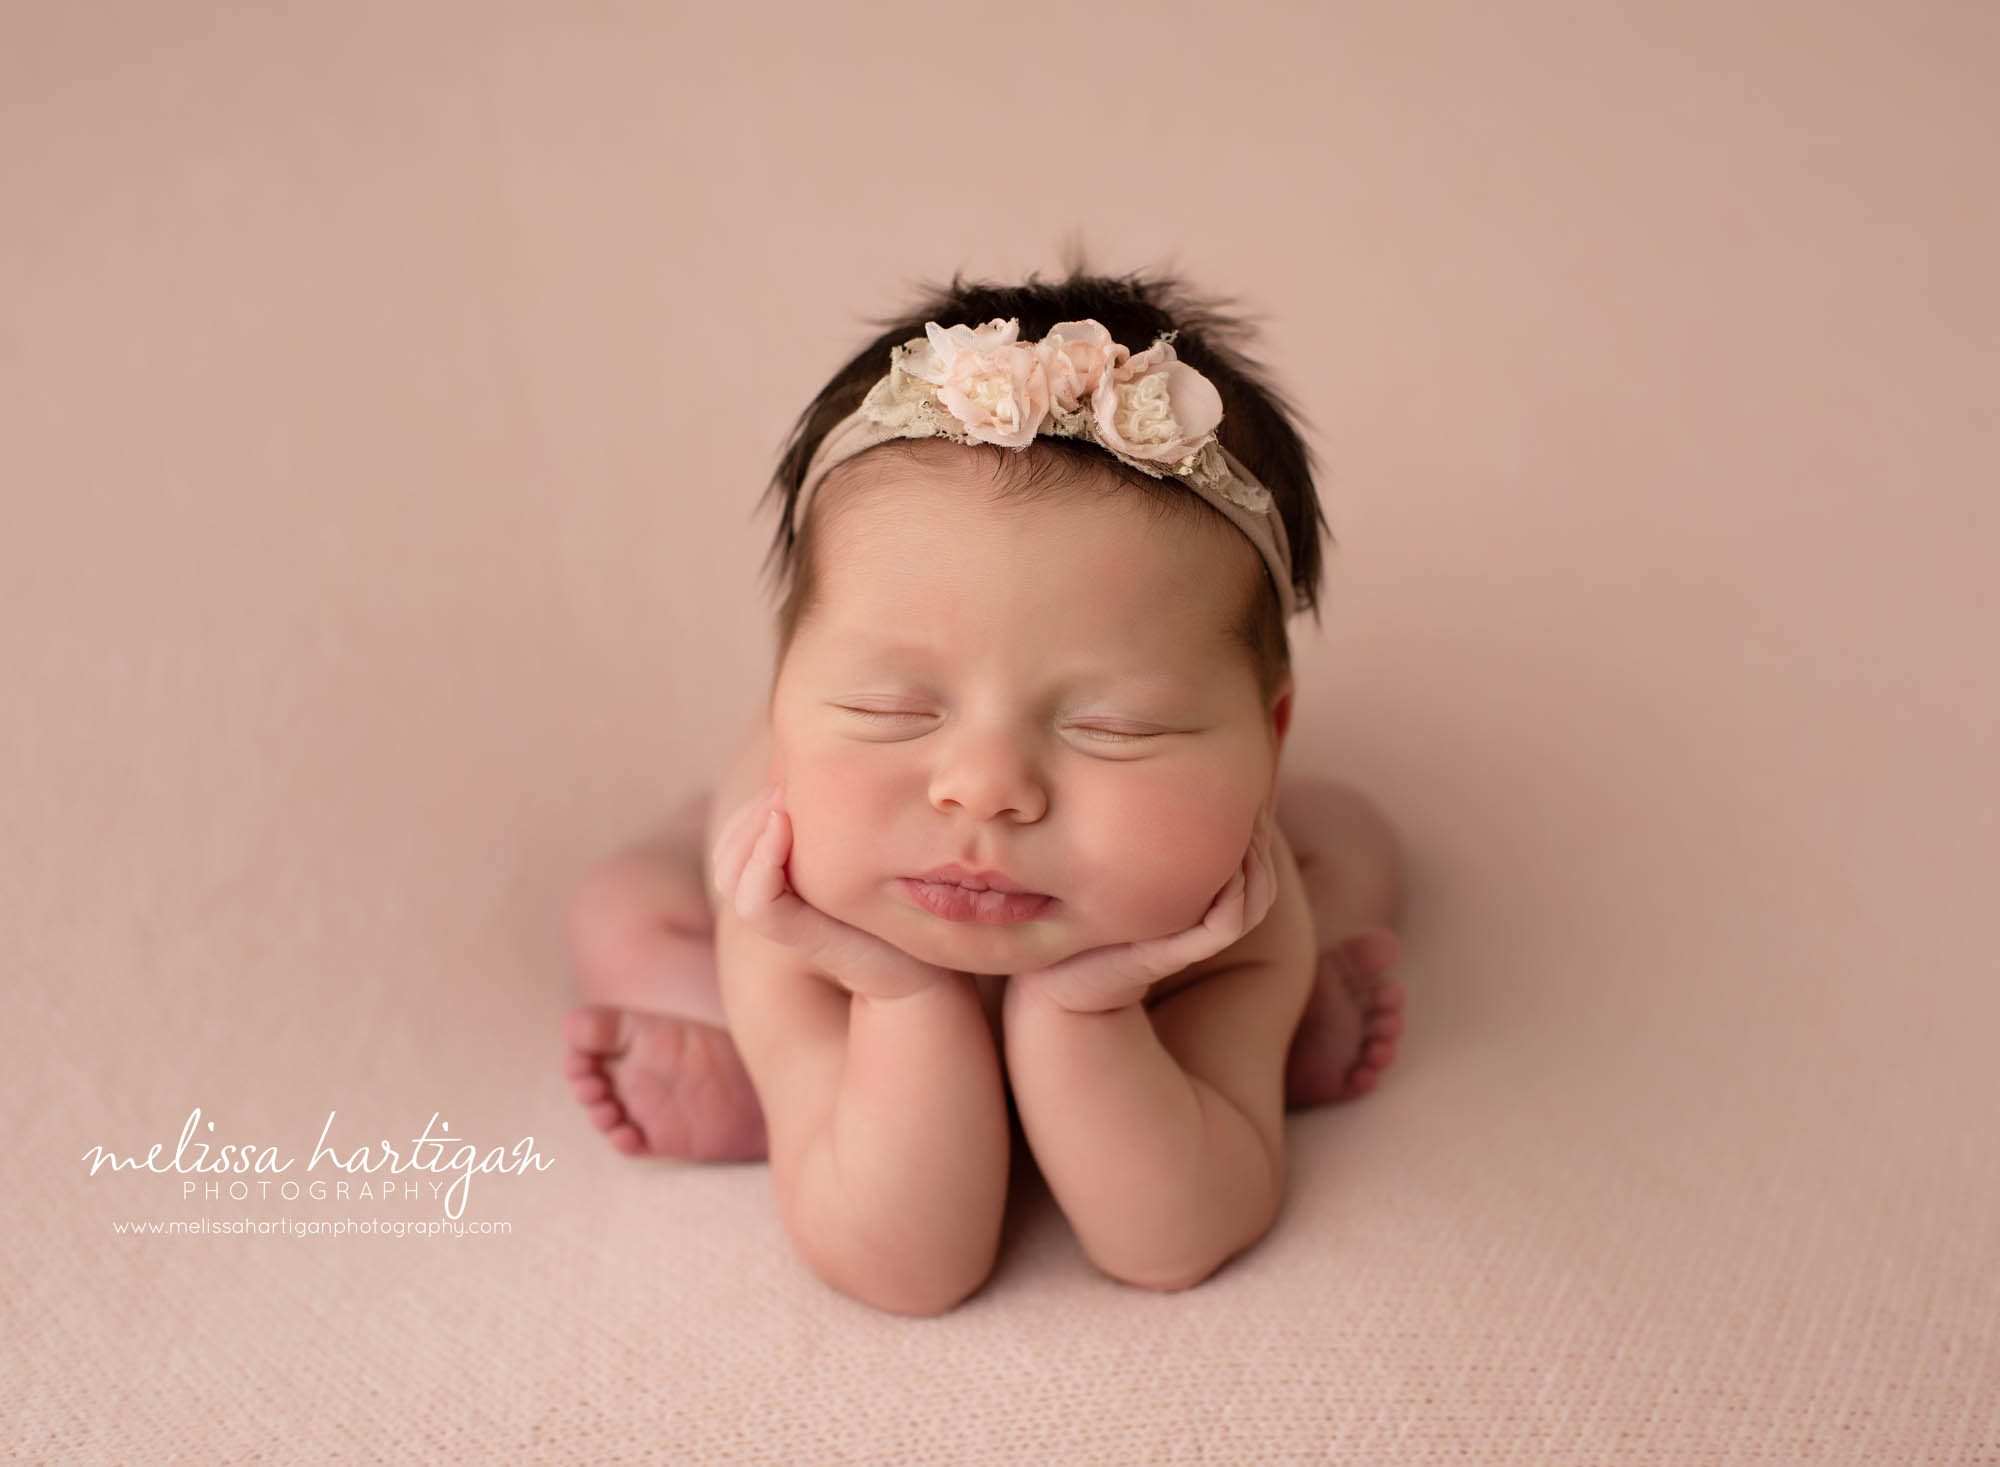 newborn baby girl posed froggy on blush pink blanket with floral headband Newborn Photography CT